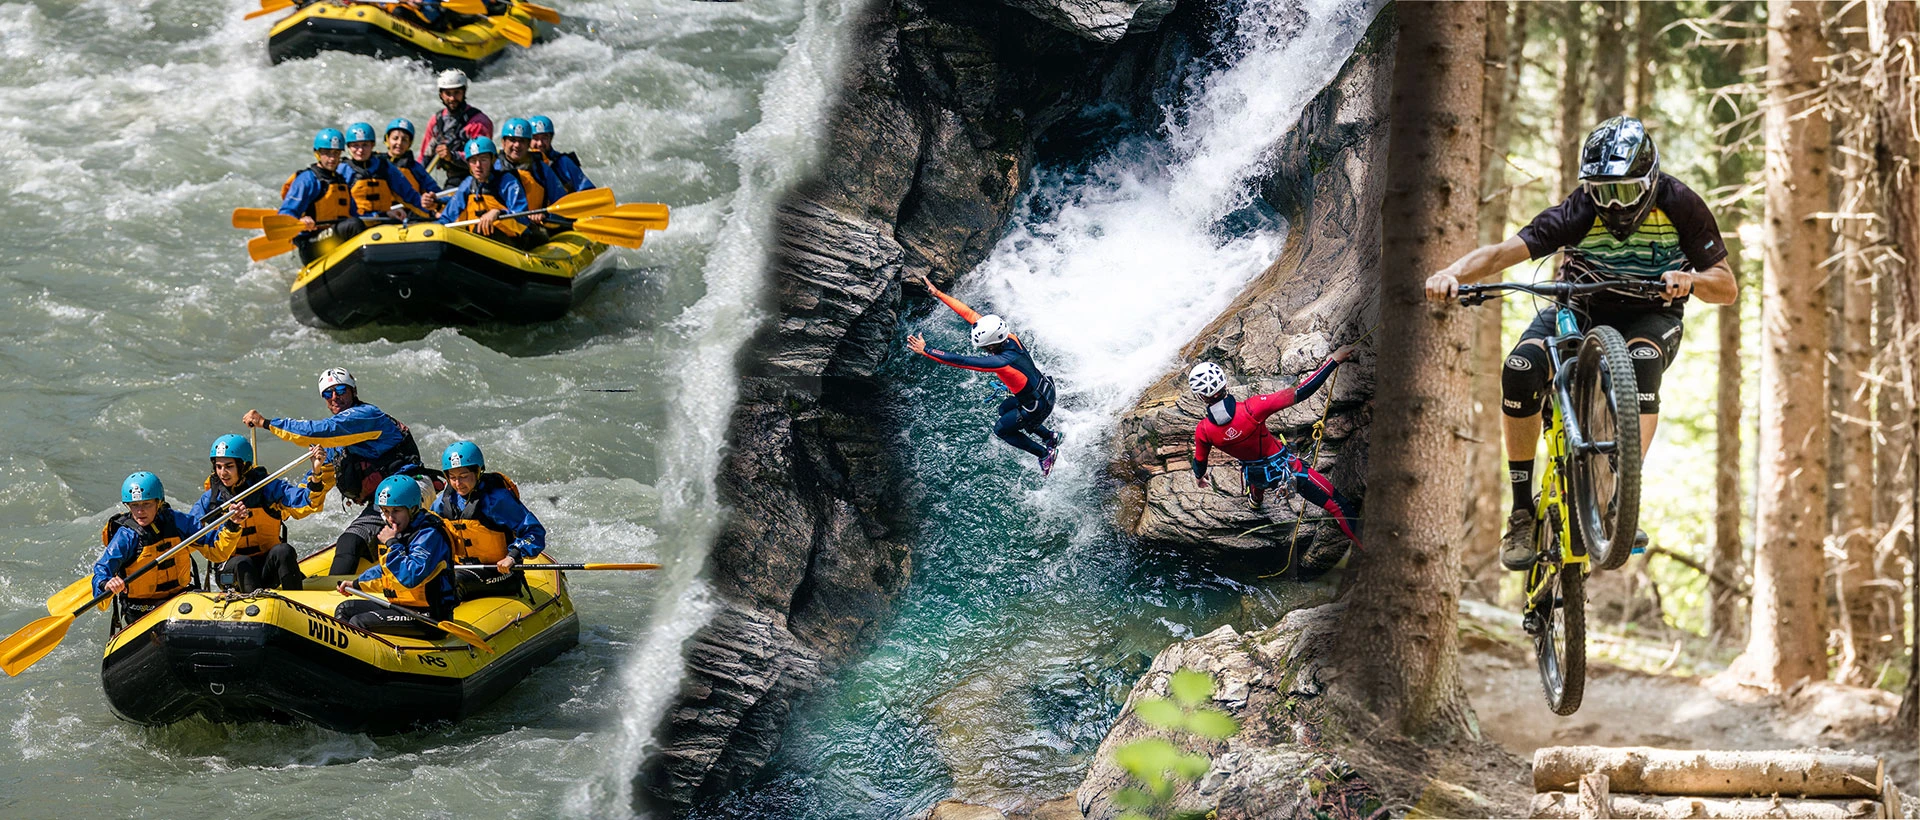 Trentino Wild - Rafting center and outdoor